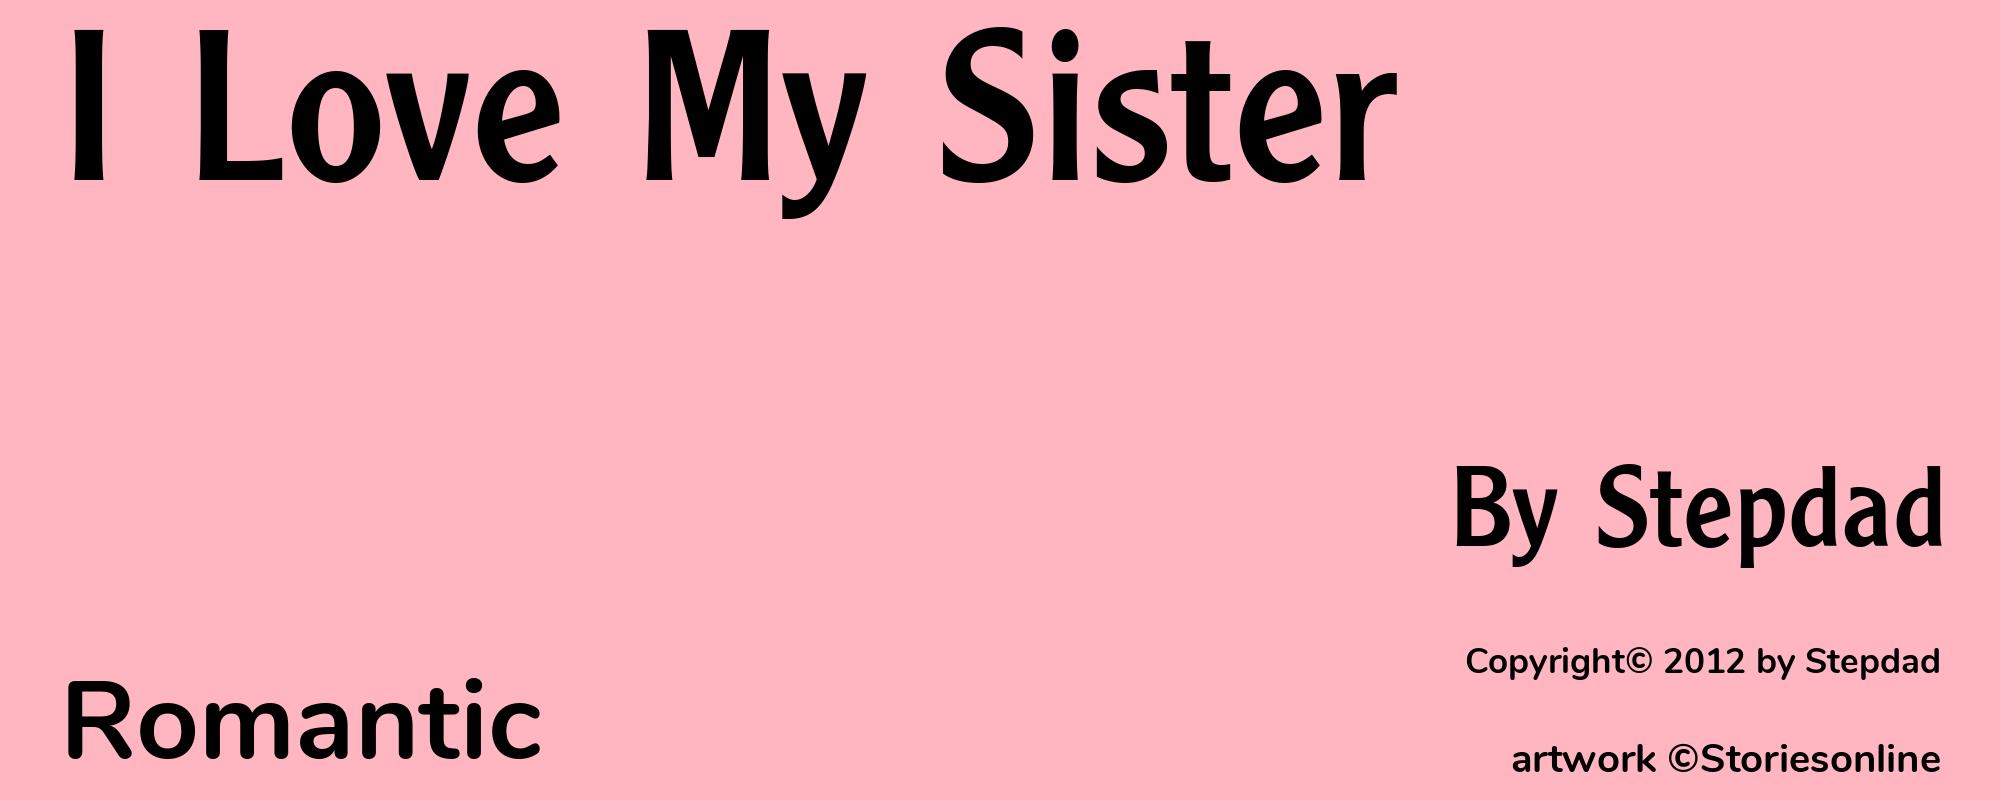 I Love My Sister - Cover